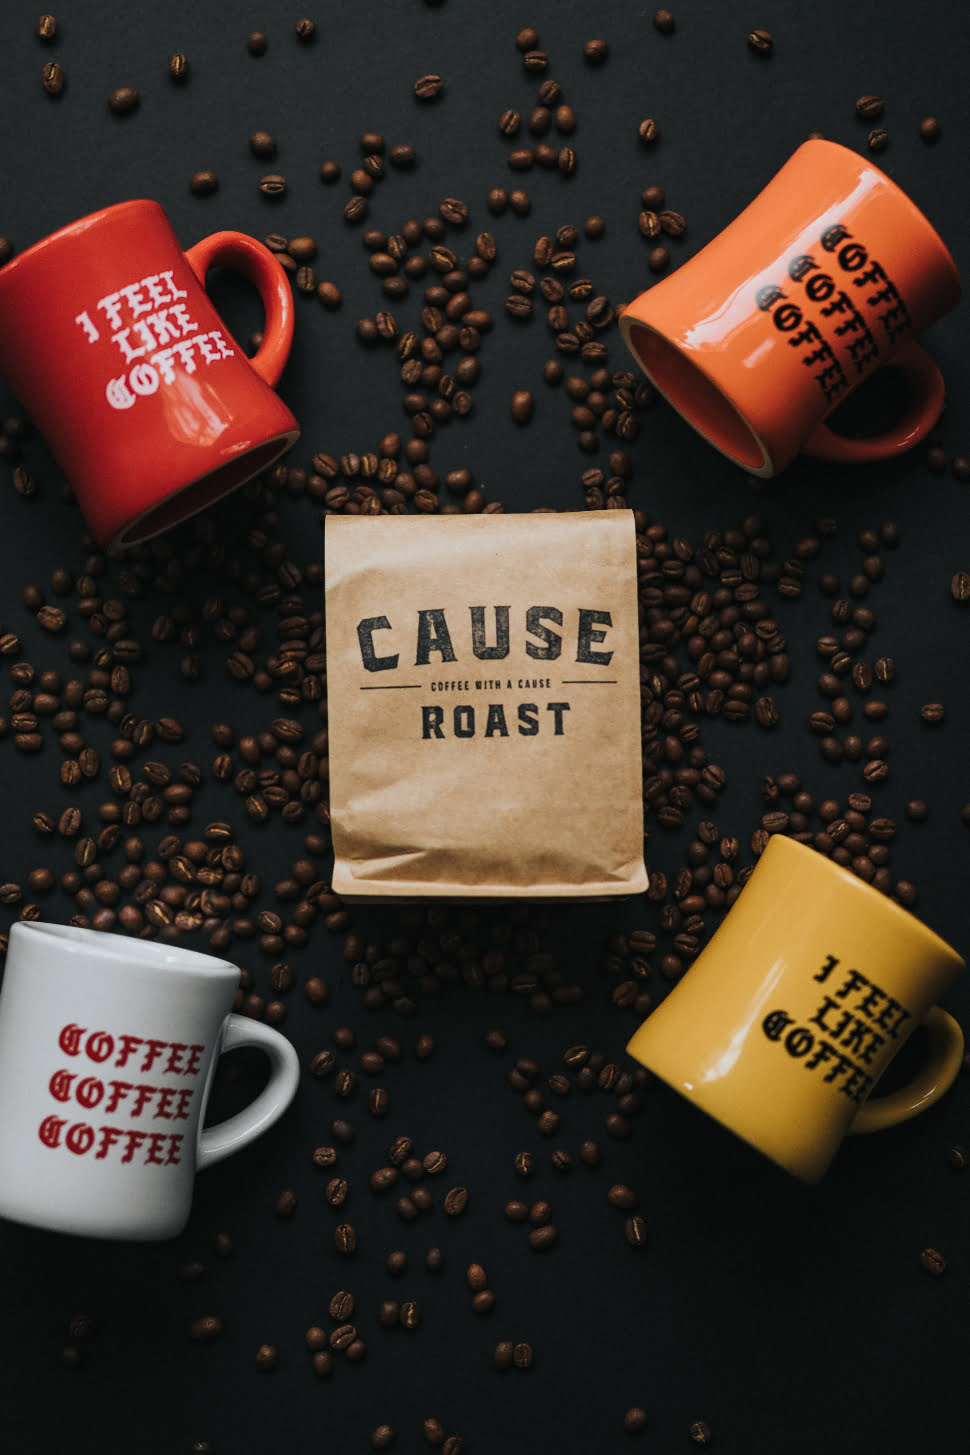 Roasted coffee beans with 4 coffee mugs with a text related to coffee.